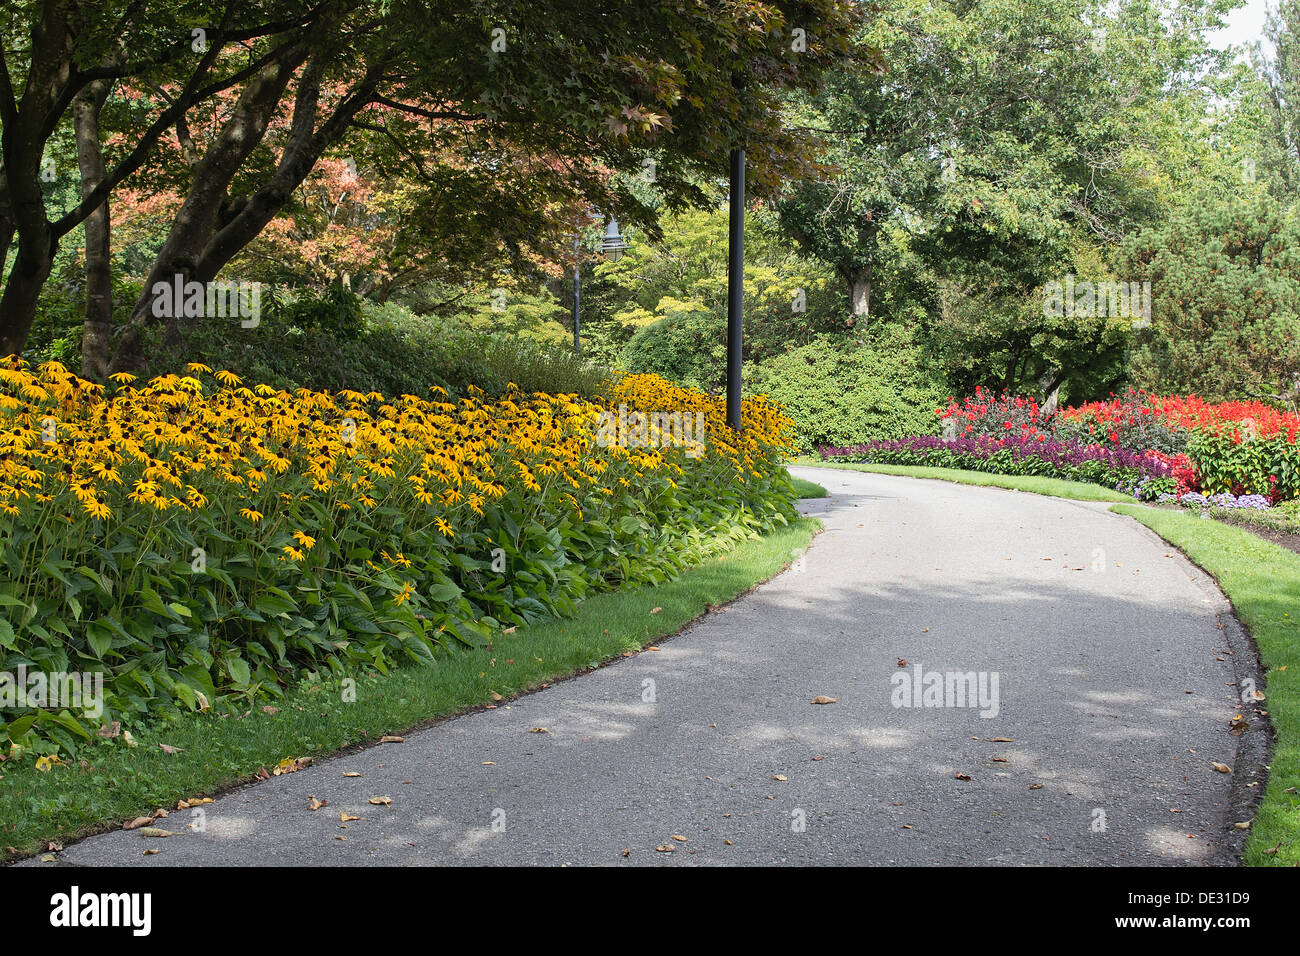 Colorful Flowers in Bloom Along Neighborhood Parks Garden in Summer Stock Photo